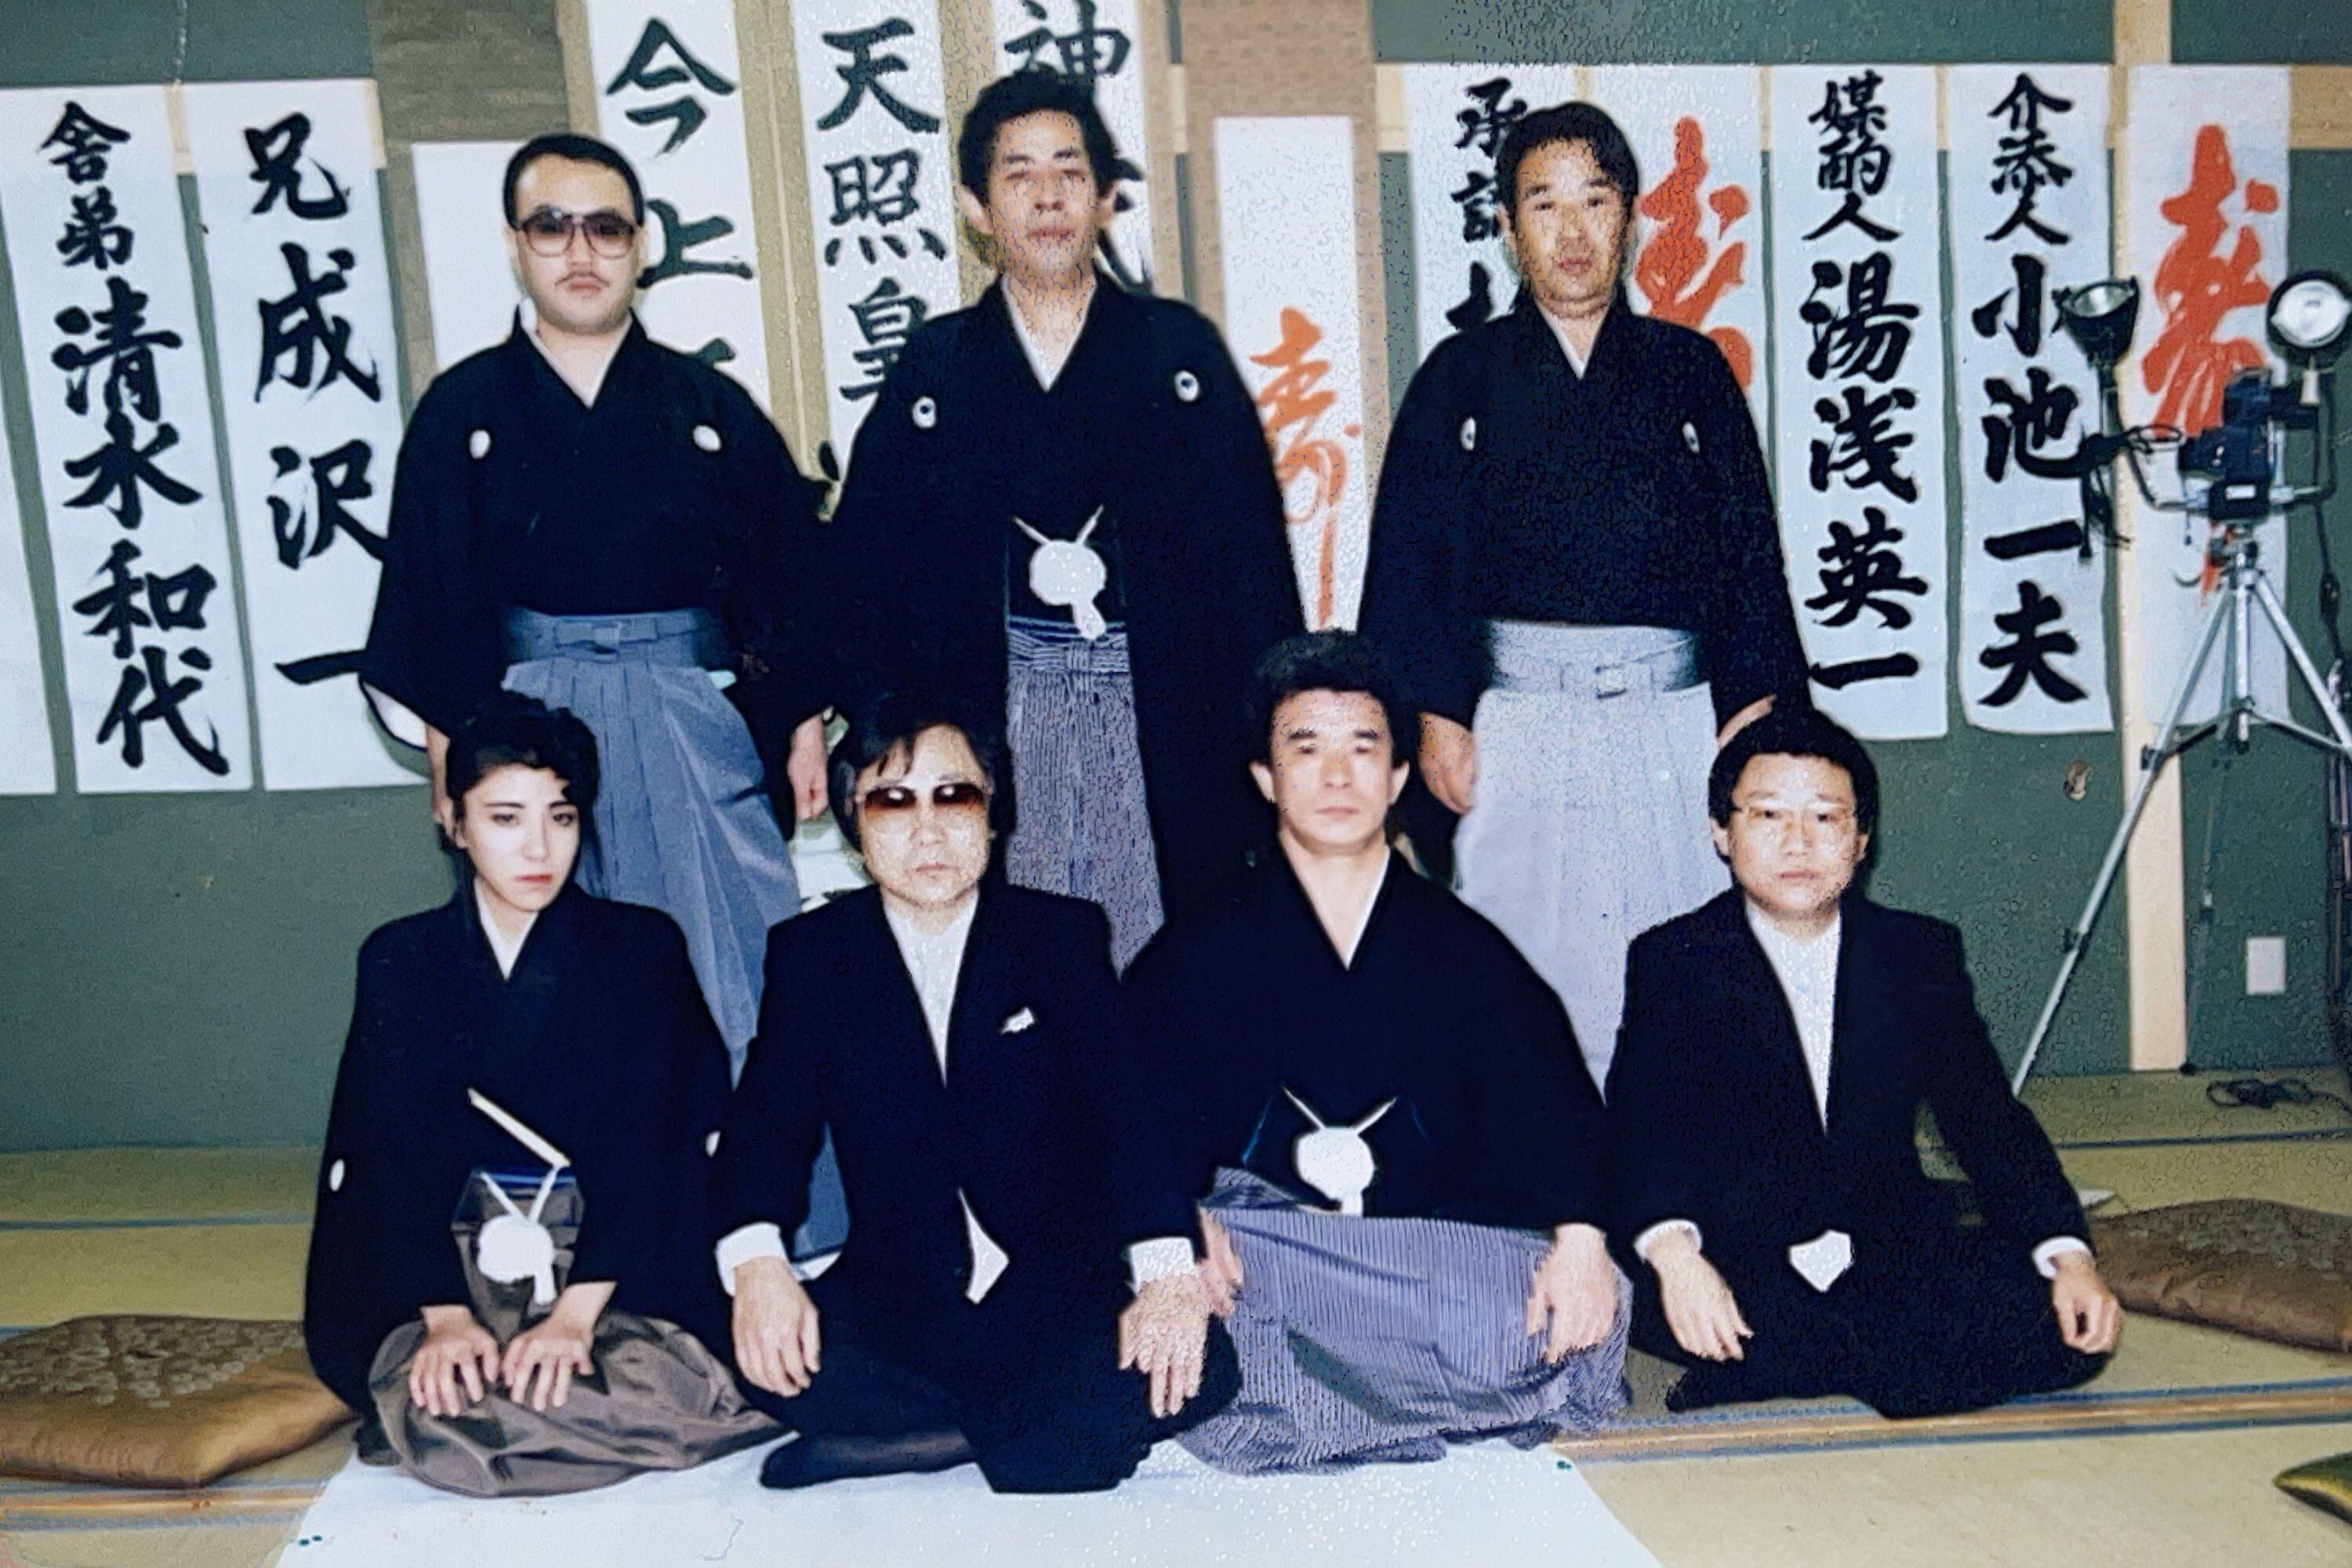 Nishimura Mako (bottom left) with his boss and yakuza colleagues in the 1980s.